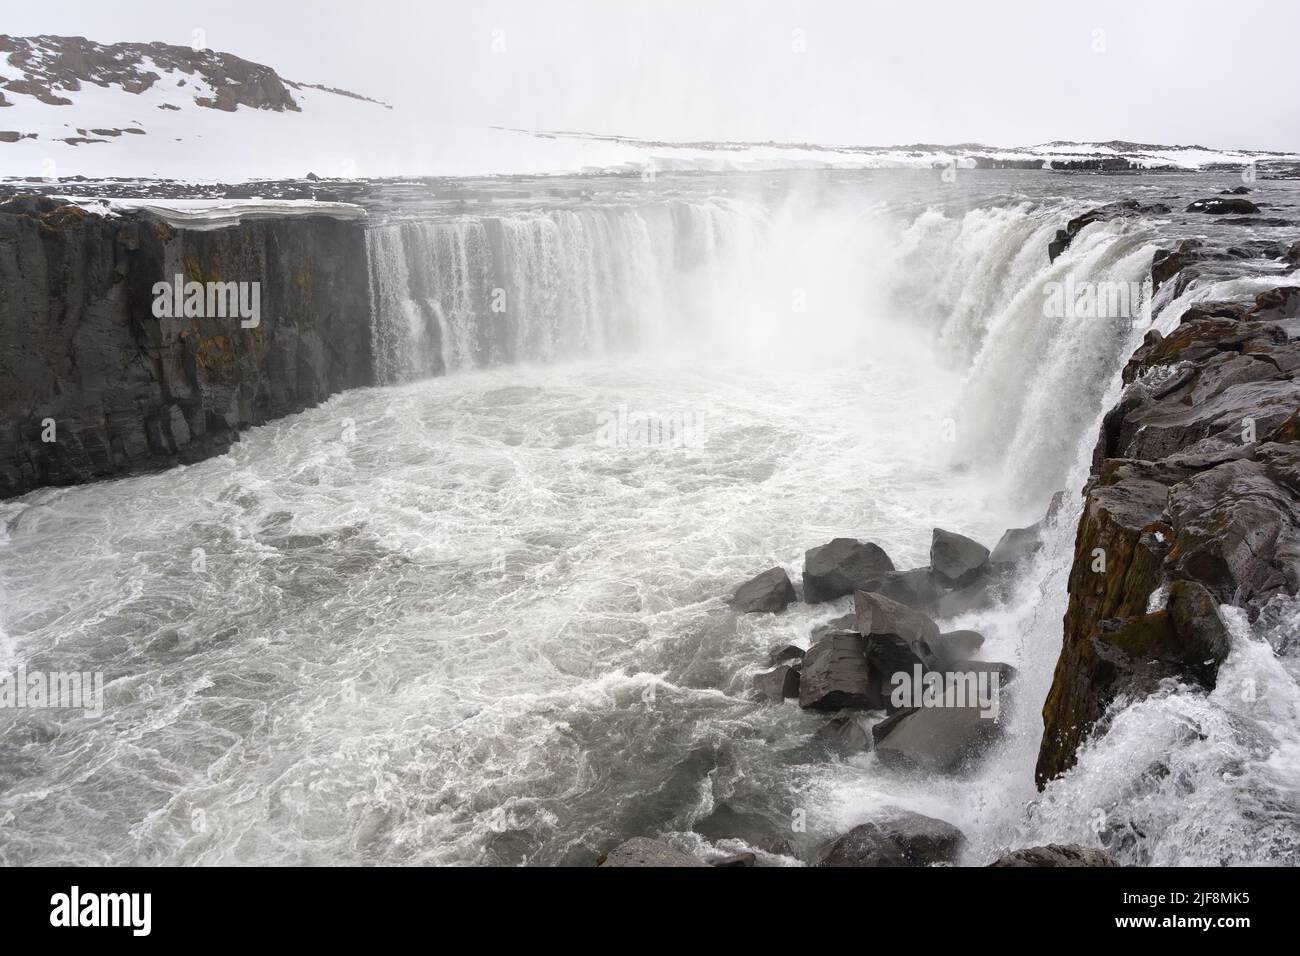 Selfoss waterfall with snow in the background. Jökulsárgljúfur national park, Iceland Stock Photo